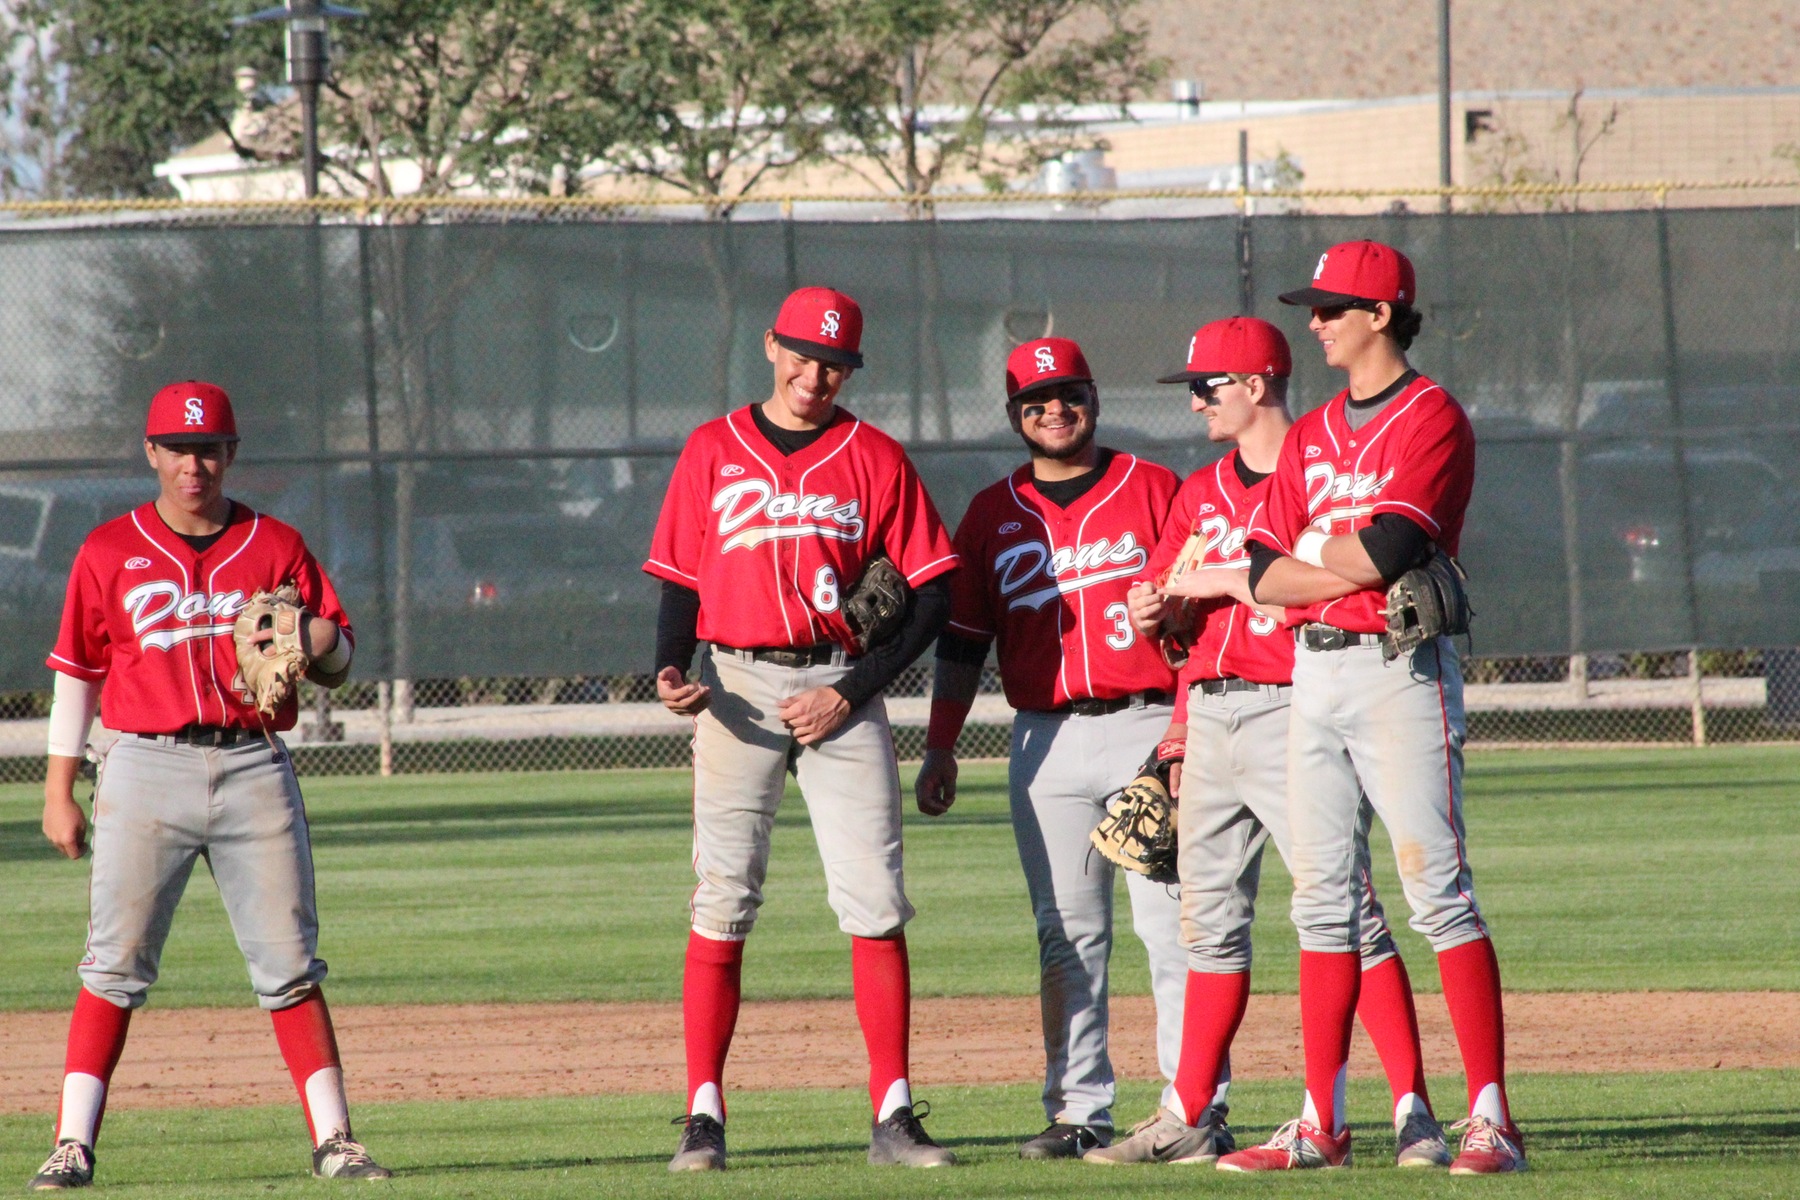 Askins Hits Walk Off Three Run Bomb to Knock Off Undefeated Chaffey